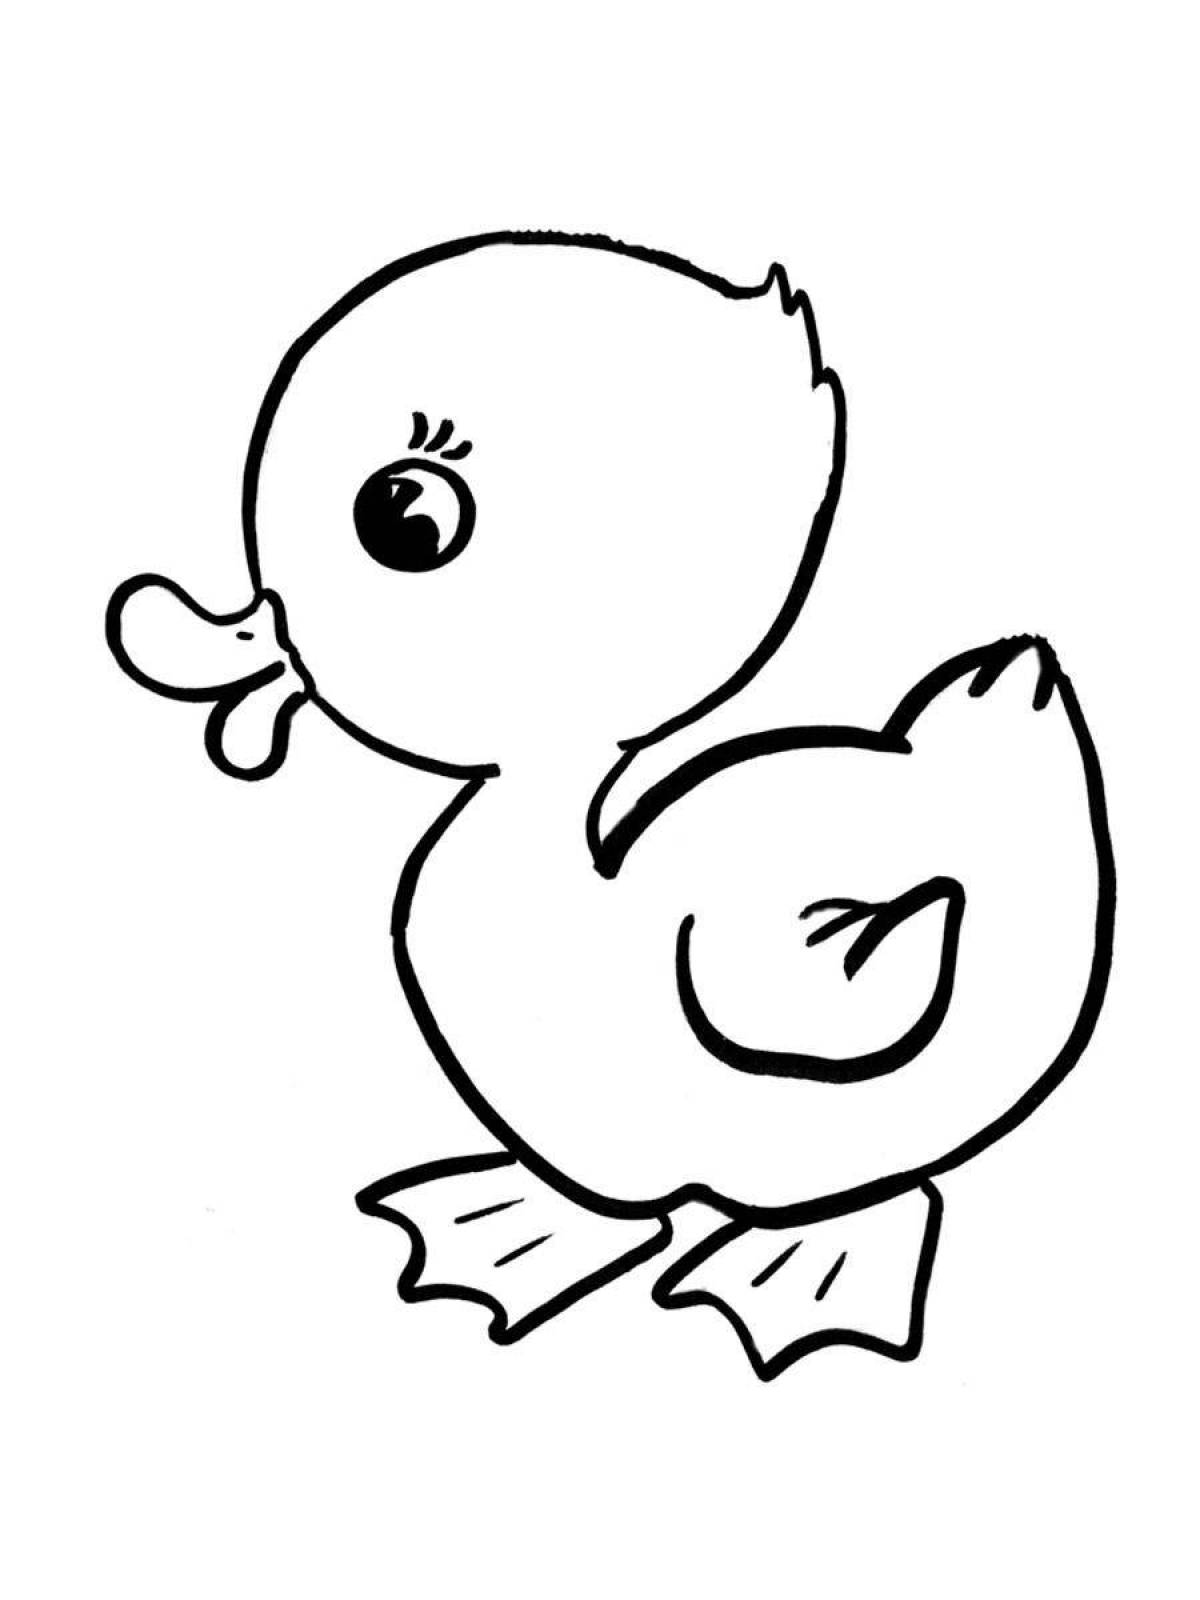 Fancy duck coloring book for 3-4 year olds